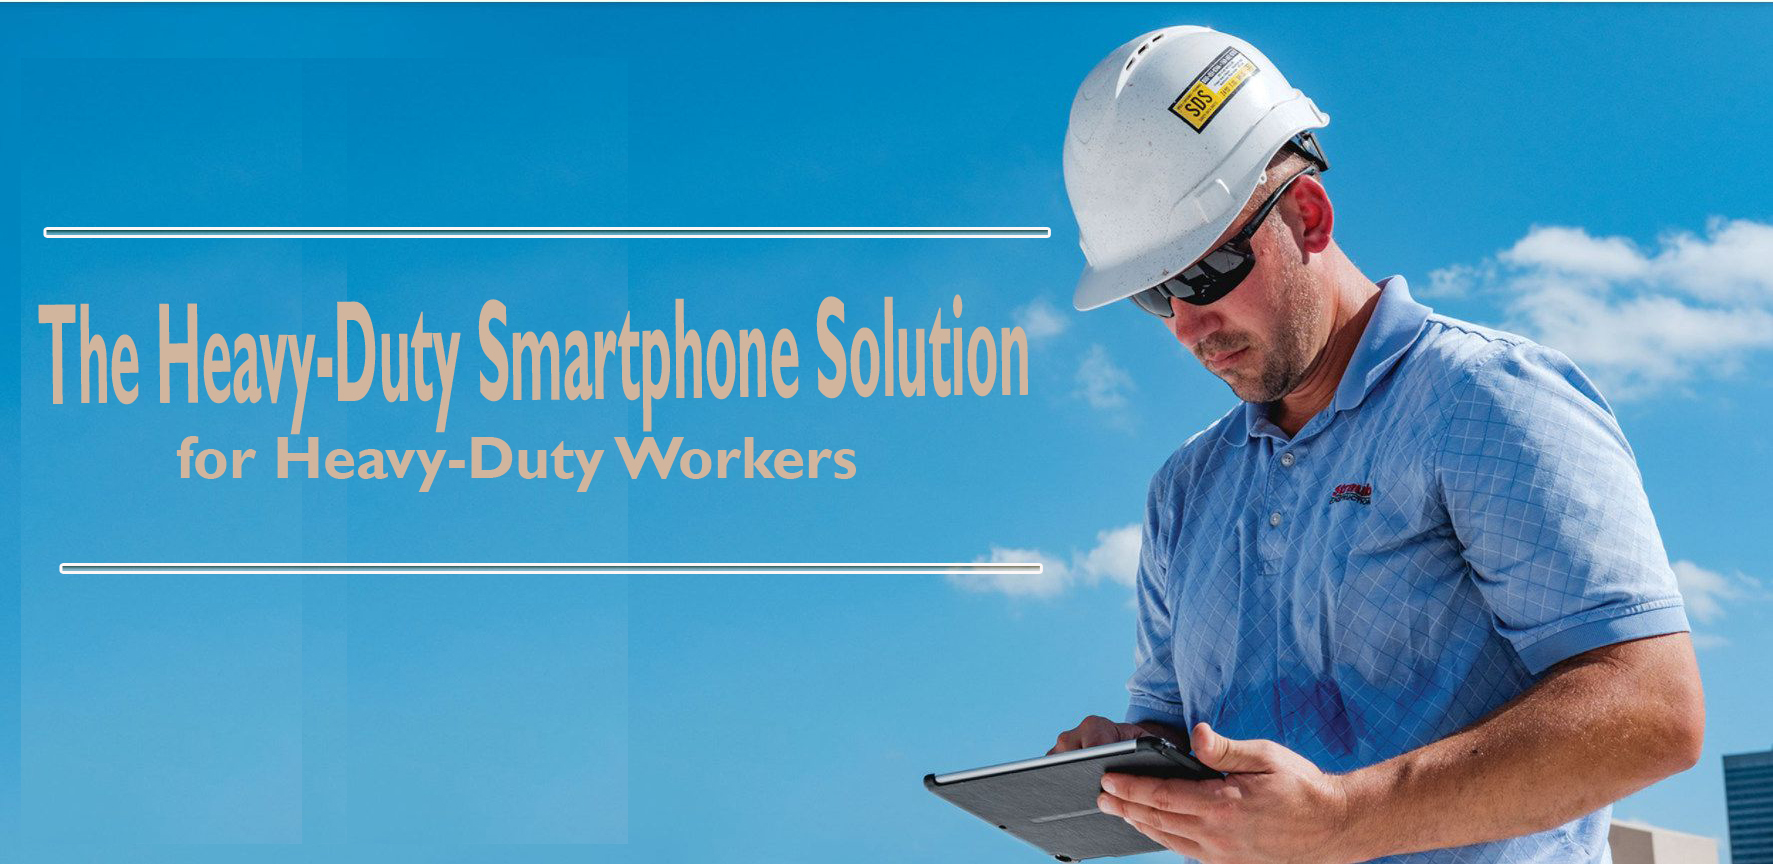 The Heavy-Duty Smartphone Solution for Heavy-Duty Workers